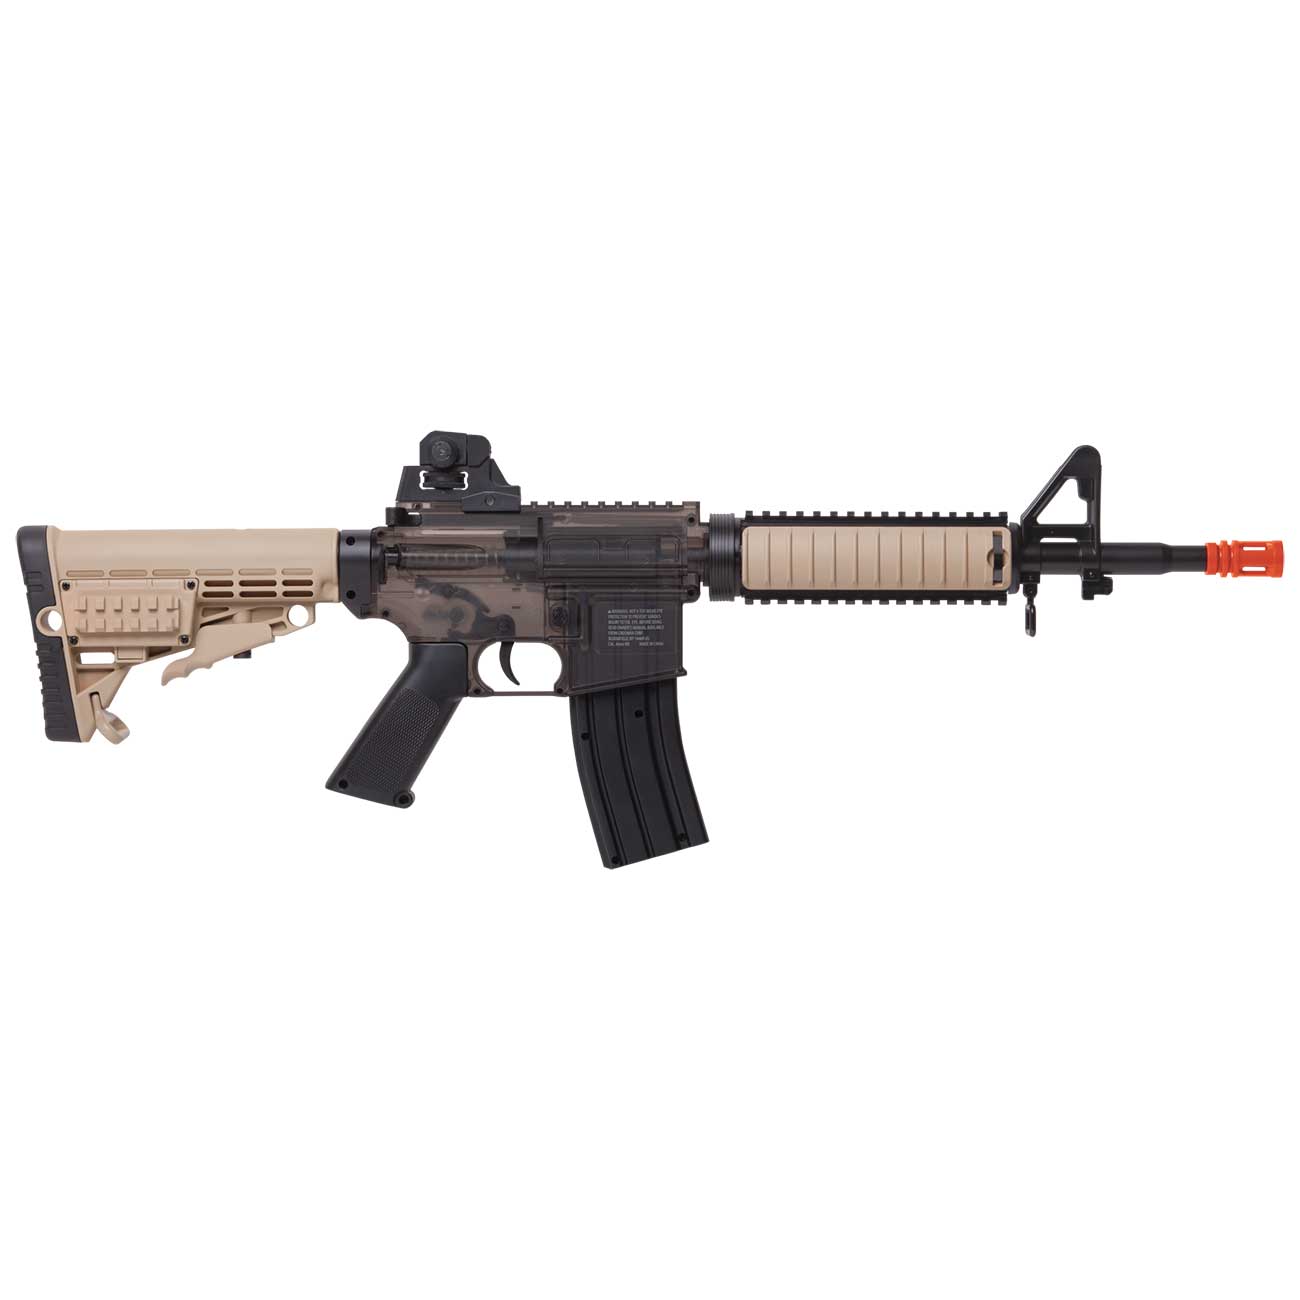 Game Face Elite Renegade 6mm Caliber Spring Powered AirSoft Rifle - California Compliant